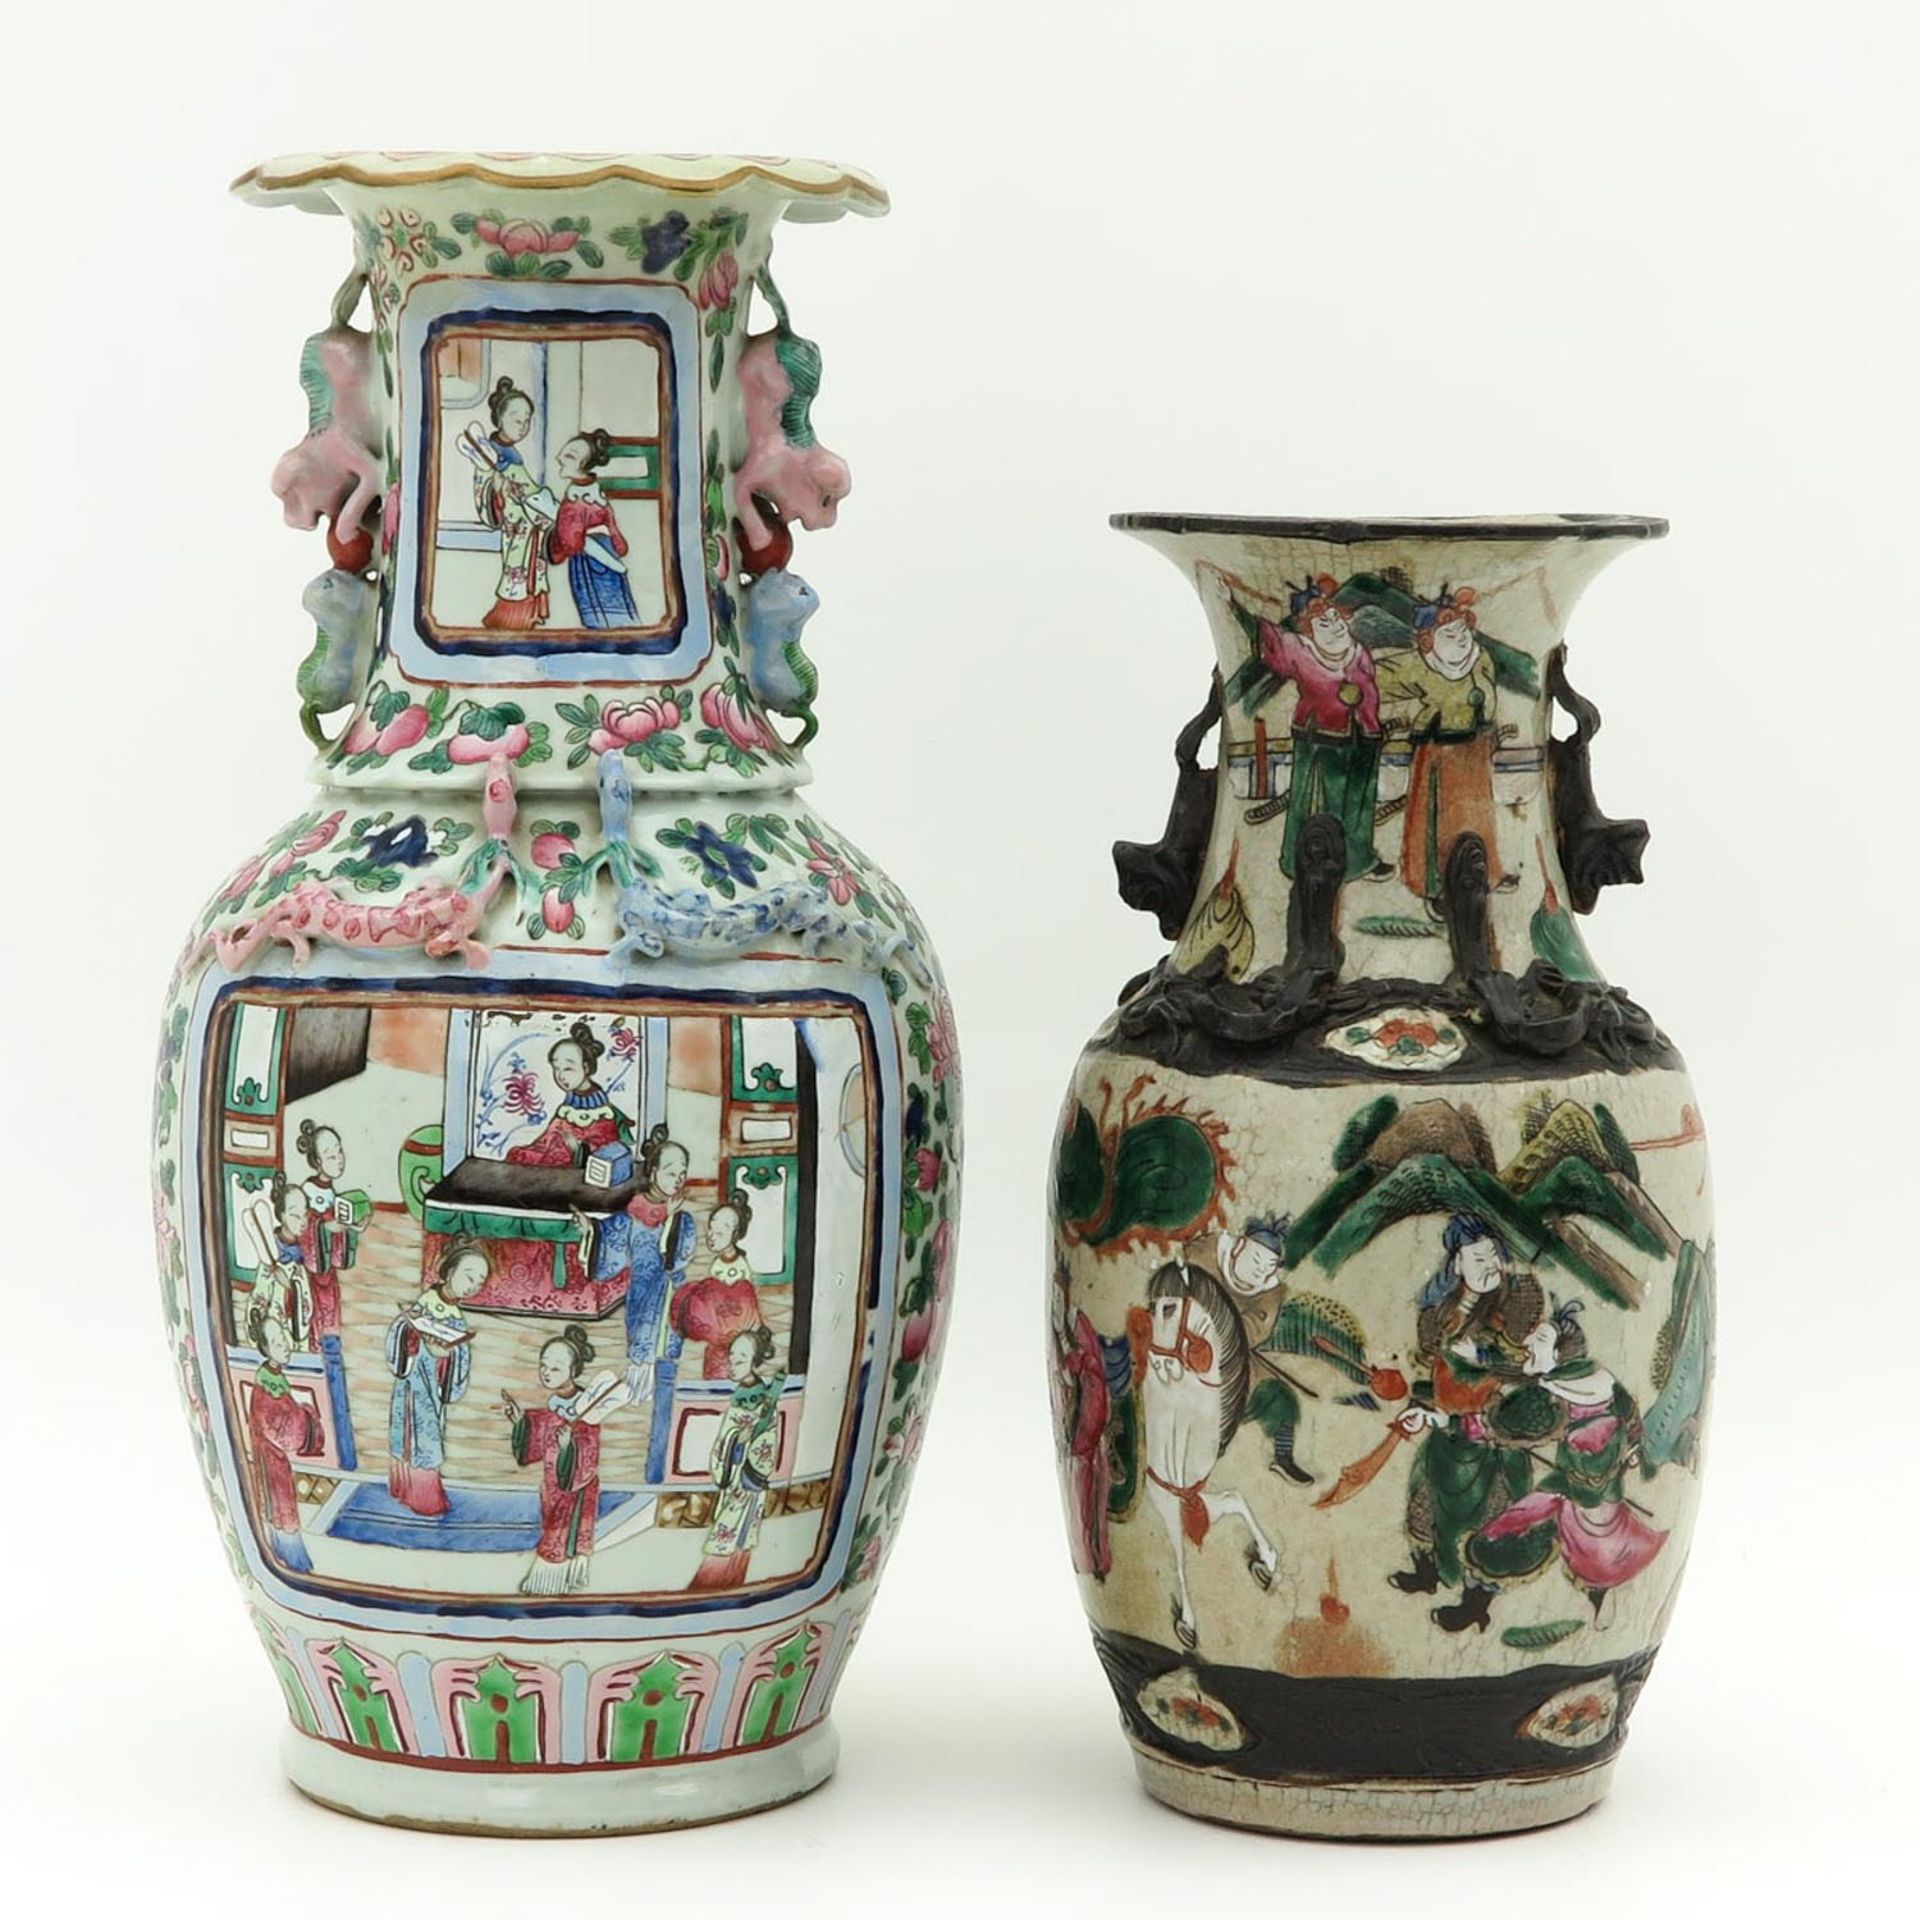 A Nanking and Cantonese Vase - Image 3 of 10